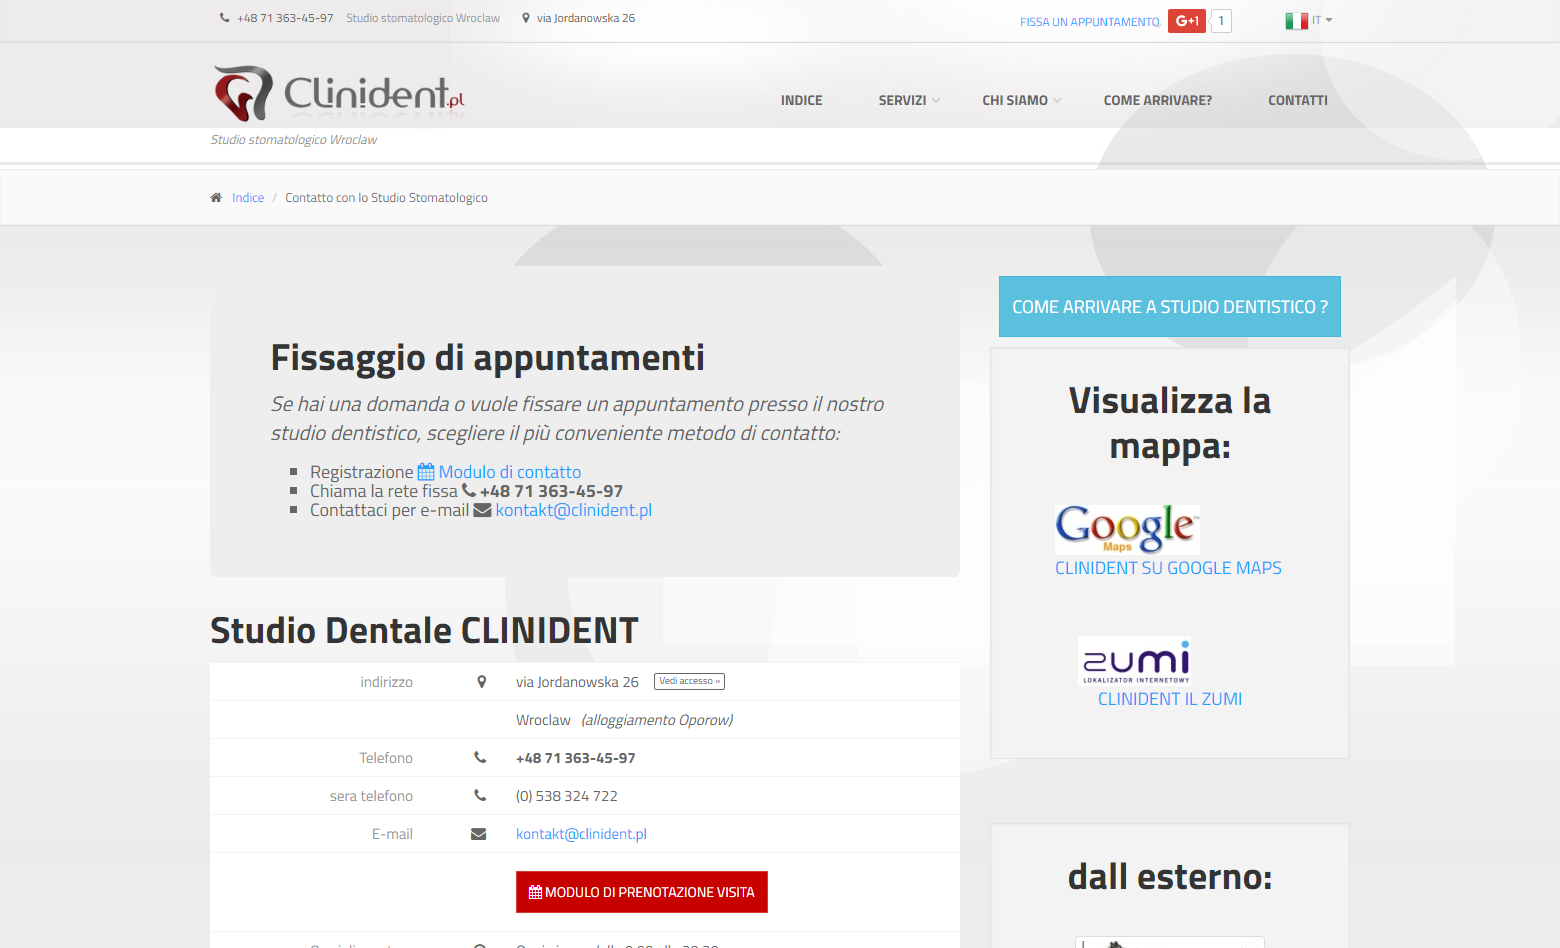 Proyecto it.Clinident.pl